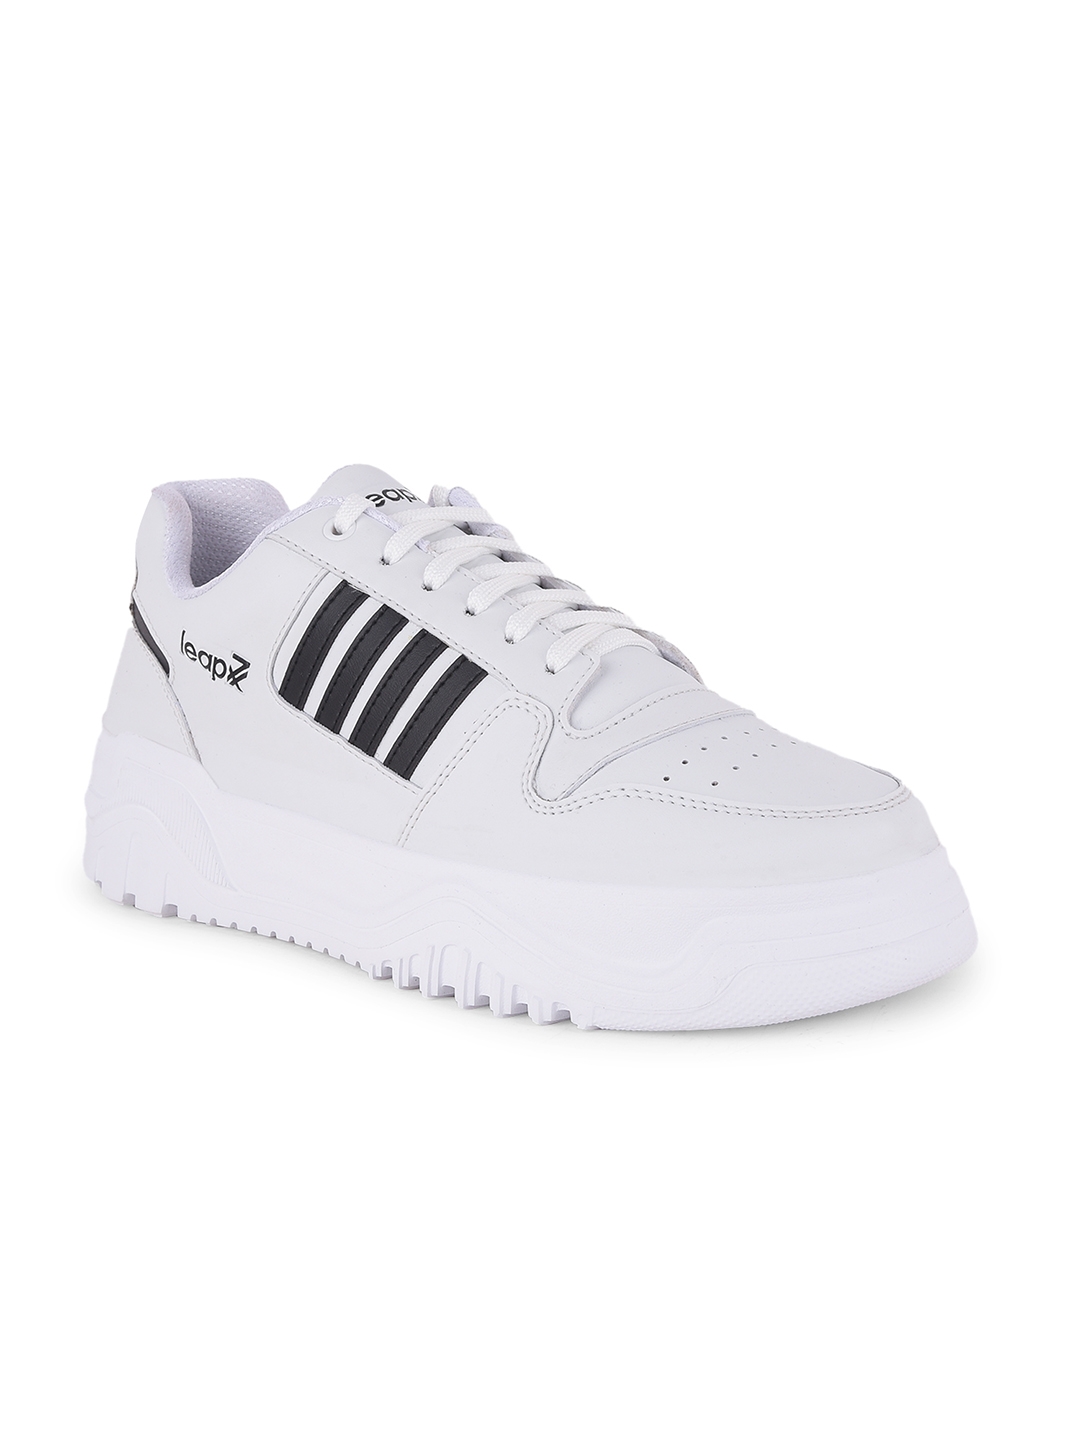 Men's LEAP7X White Solid Casual Lace up Shoes